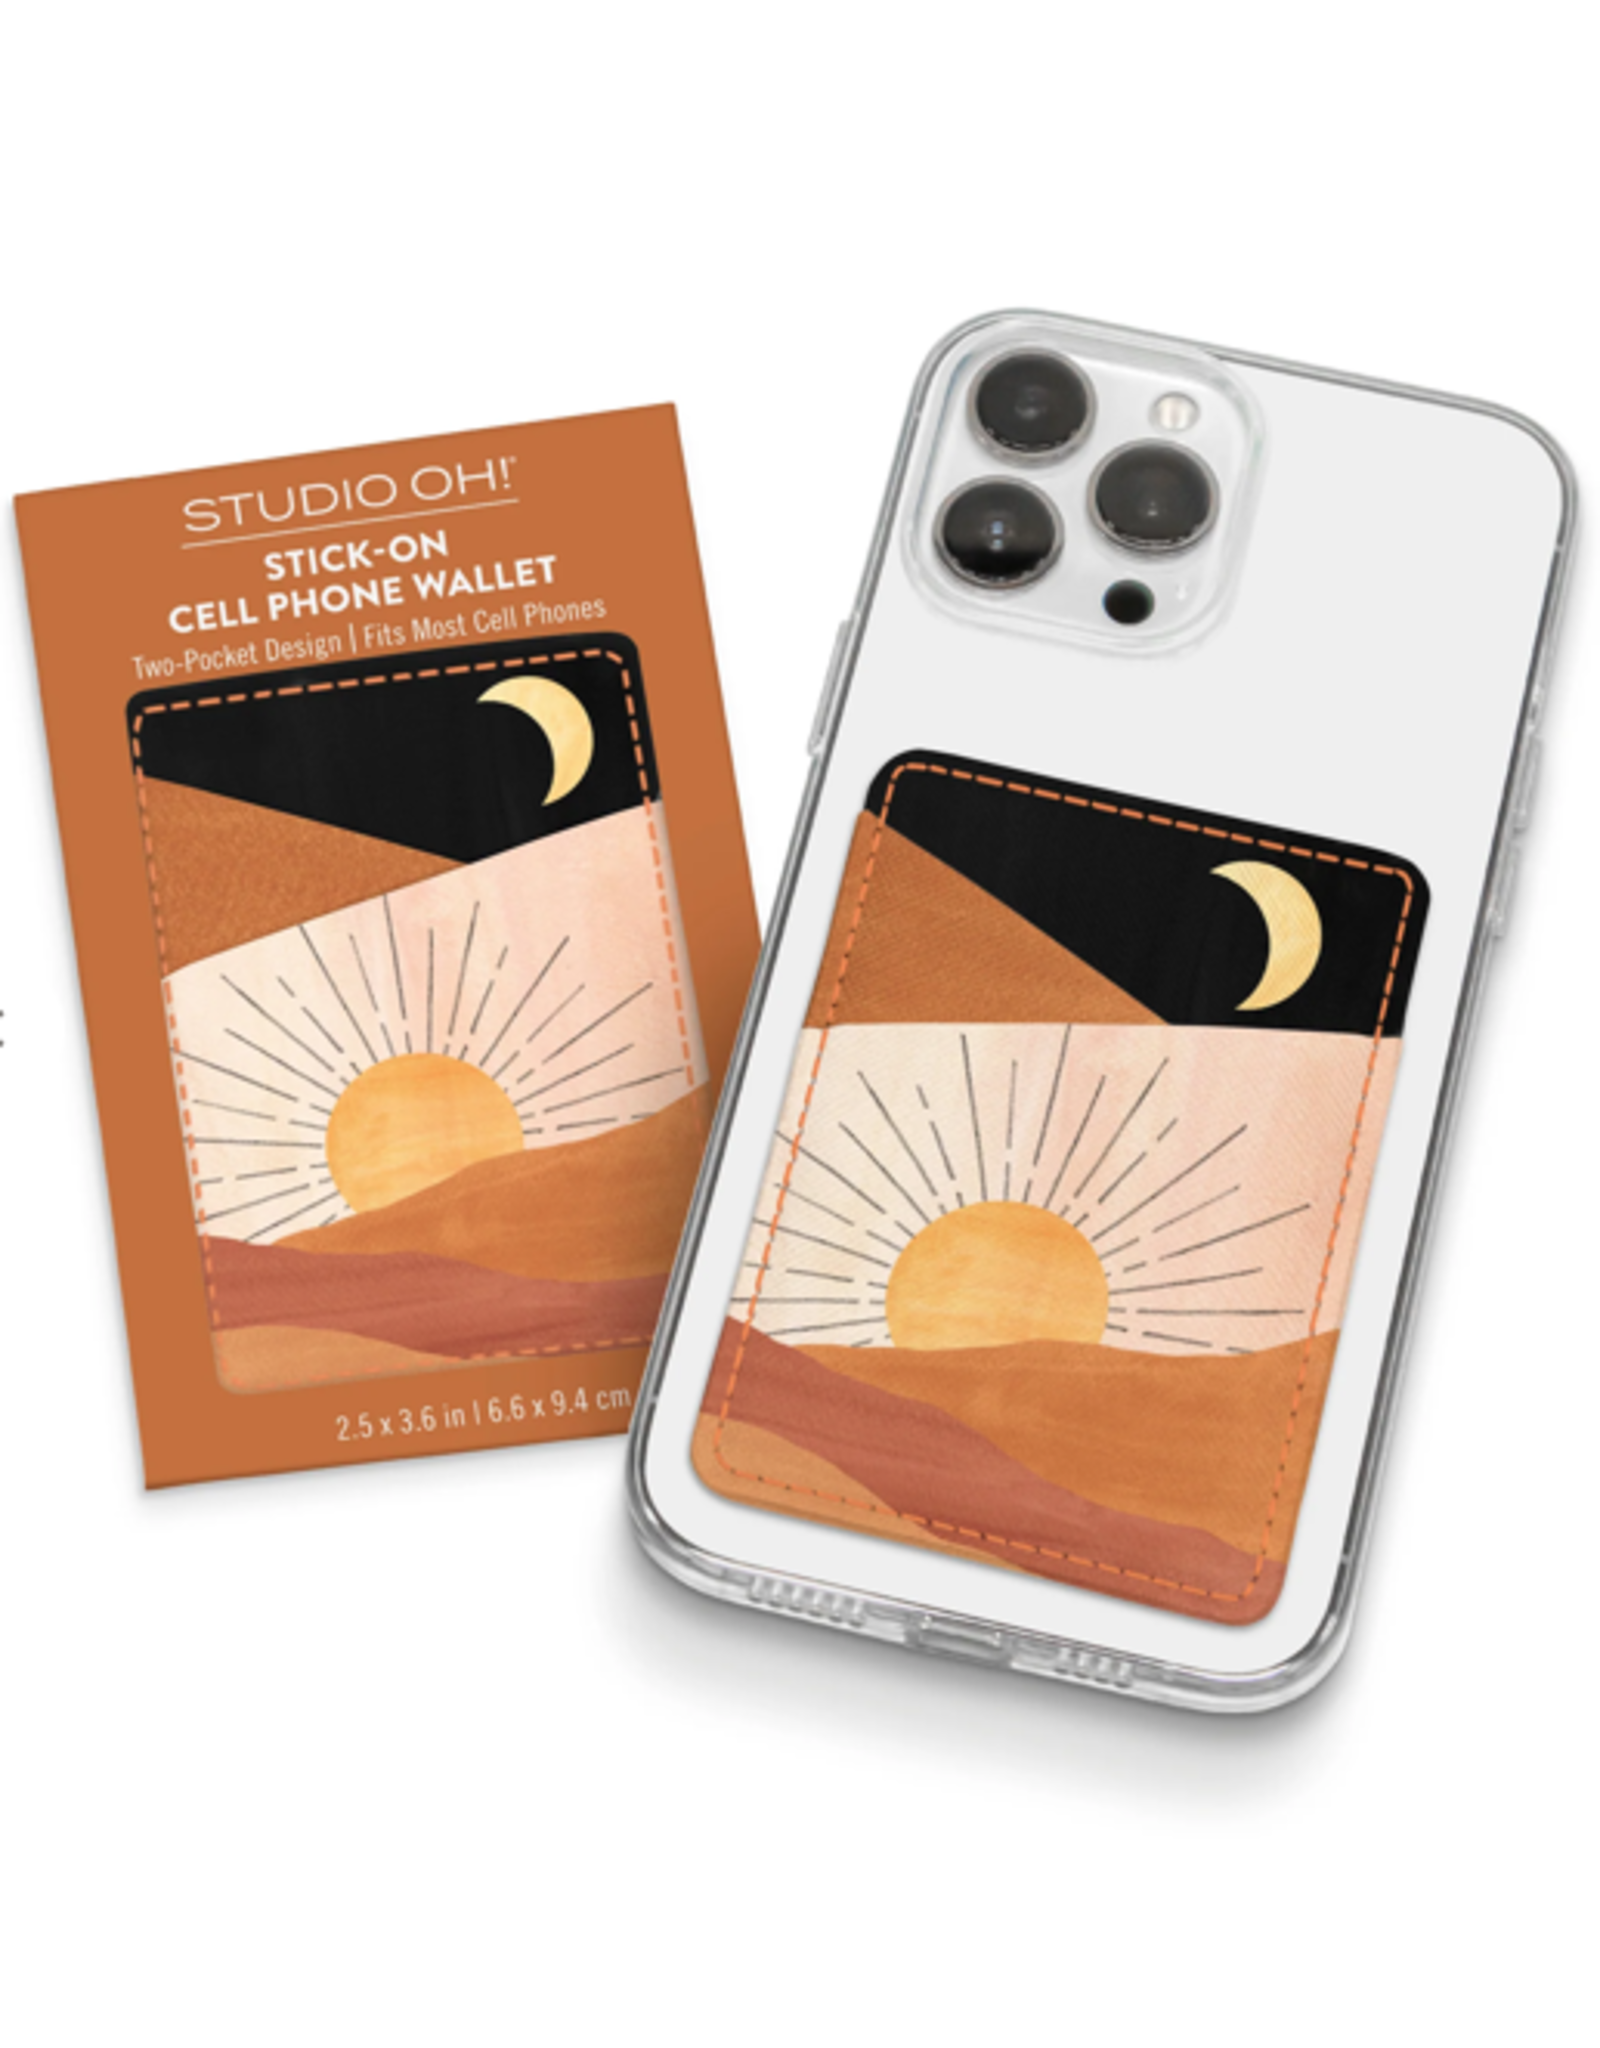 Stick On Cell Phone Wallet Sunrise Moon